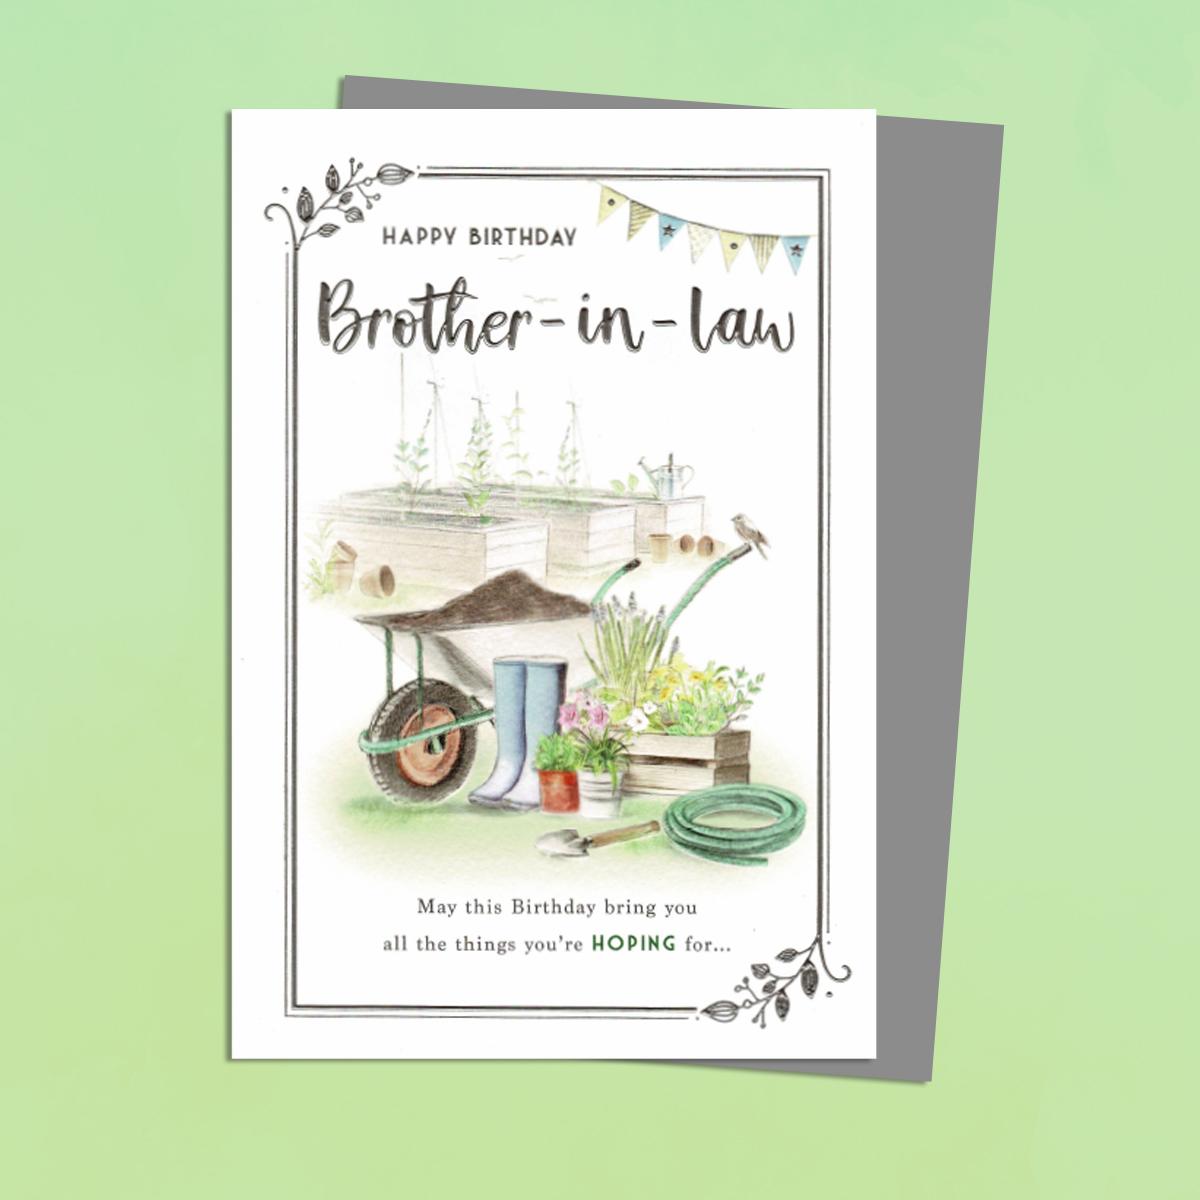 Brother In Law Gardening Scene Birthday Card Featuring A Wheelbarrow, Garden Shed And Plants